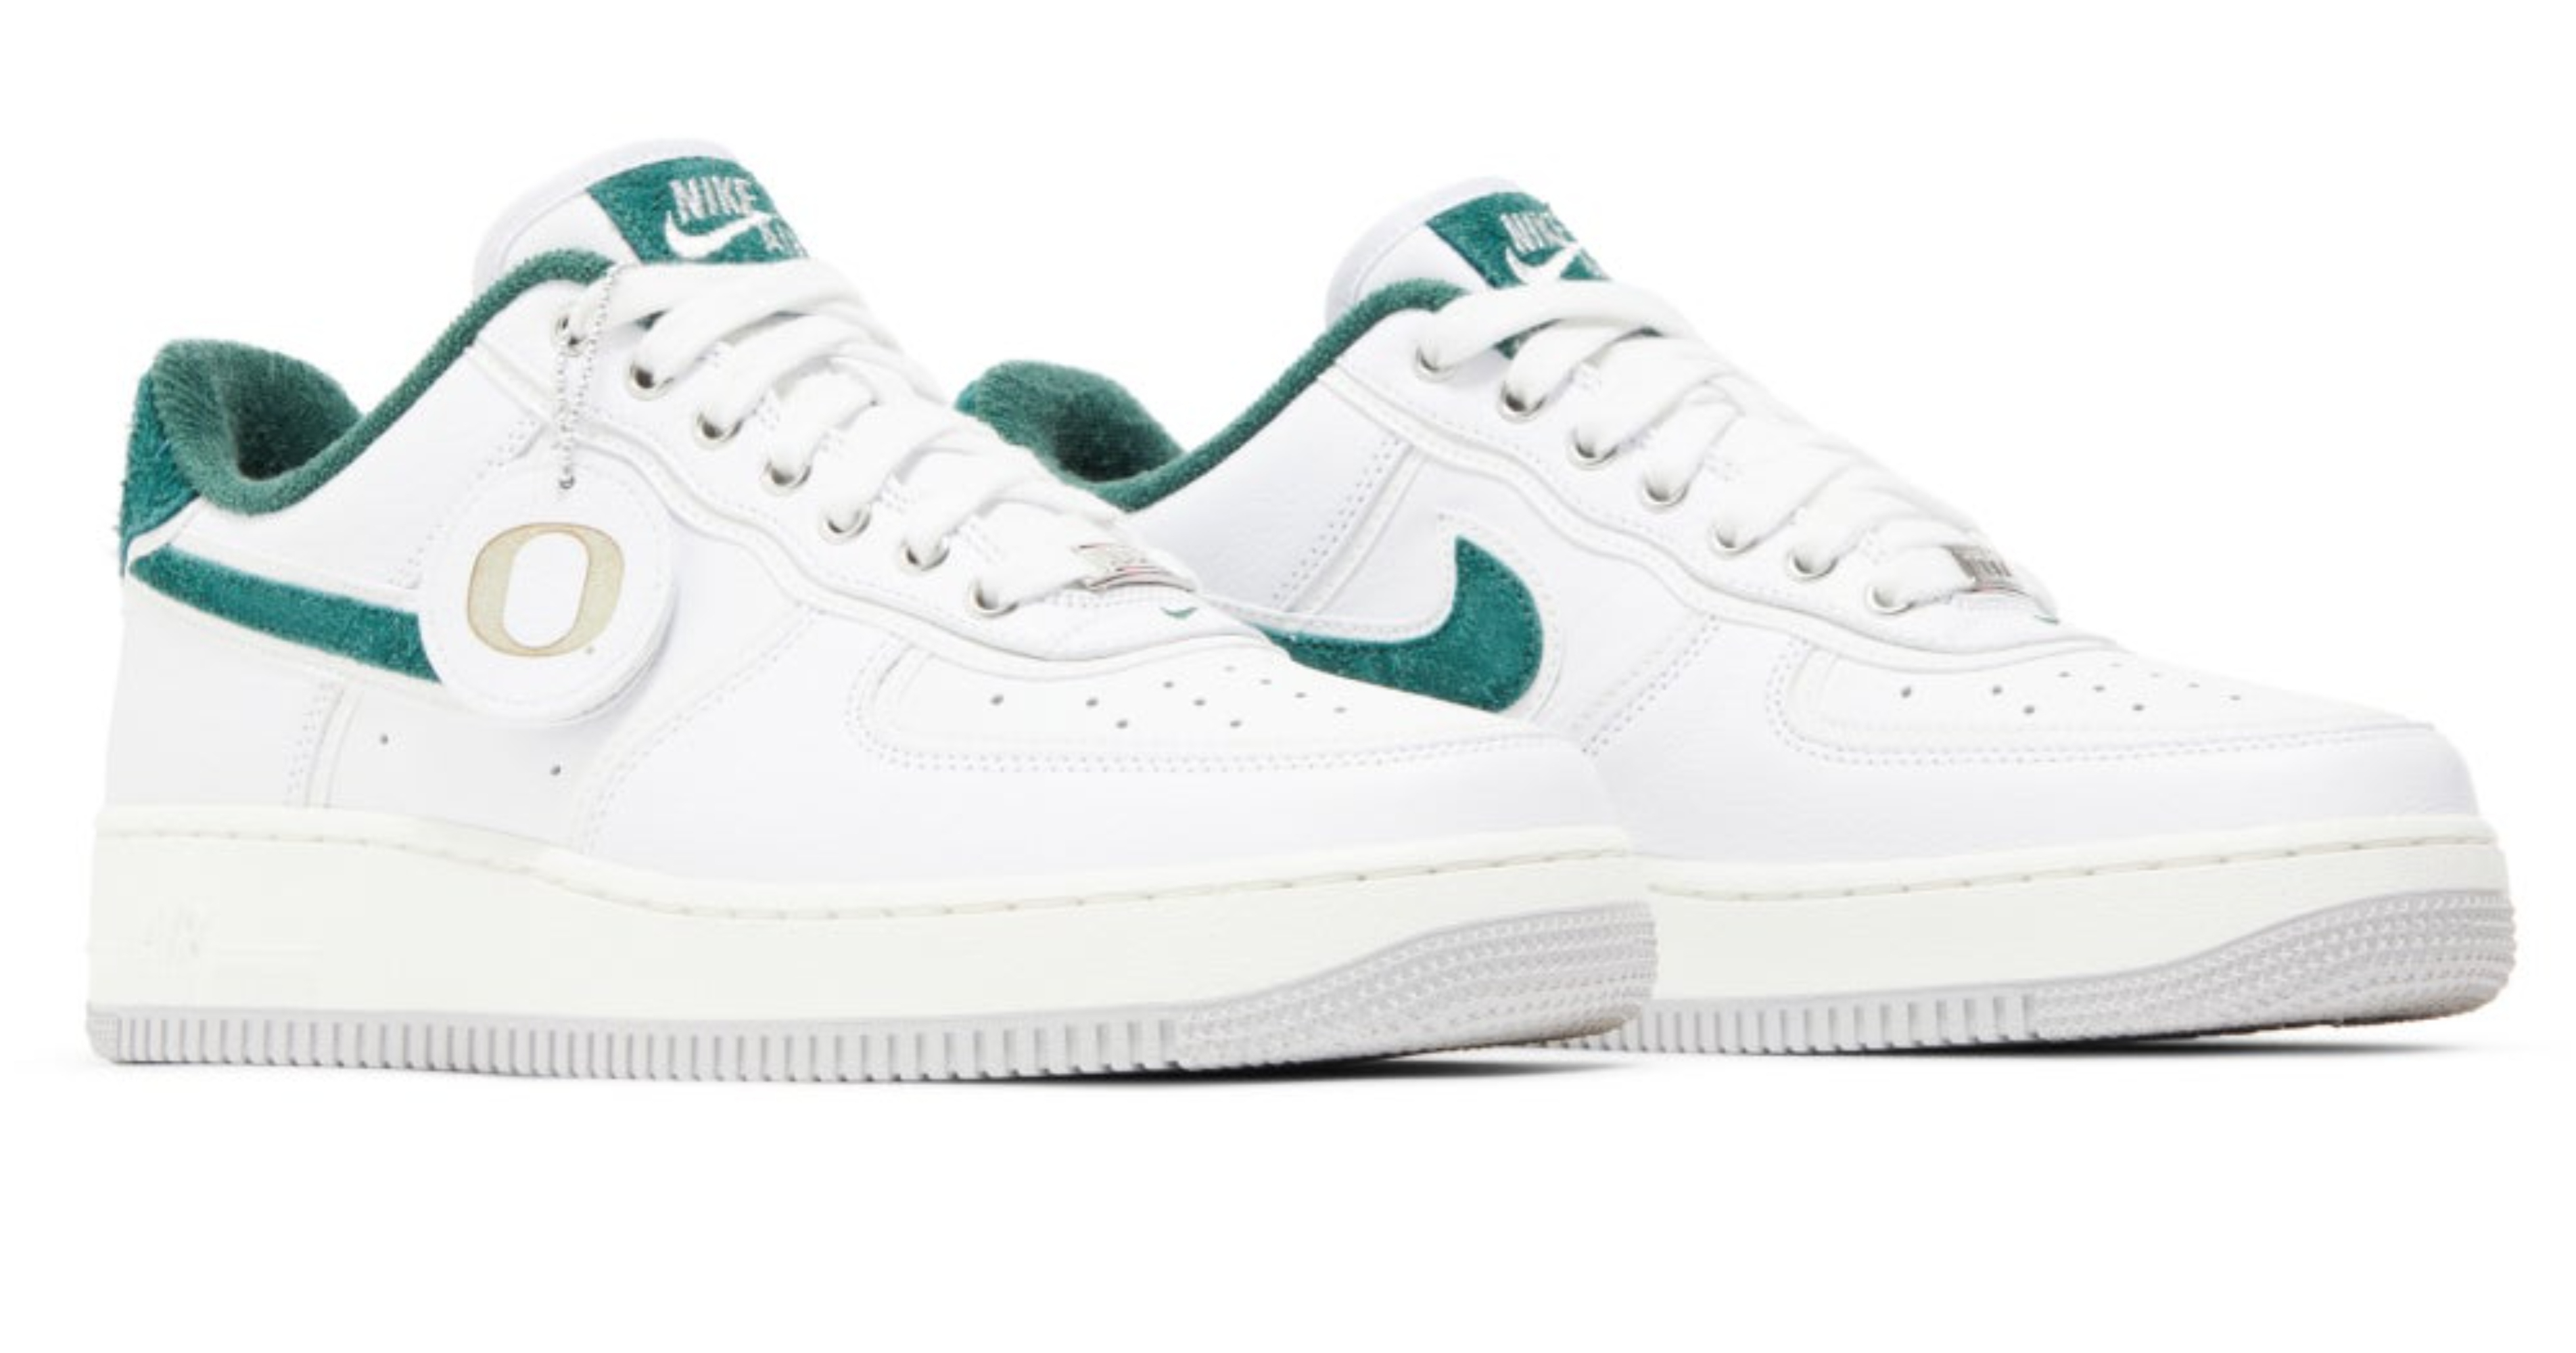 Nike Air Force 1 07 LV8 - 2022 Release Dates, Photos, Where to Buy & More 